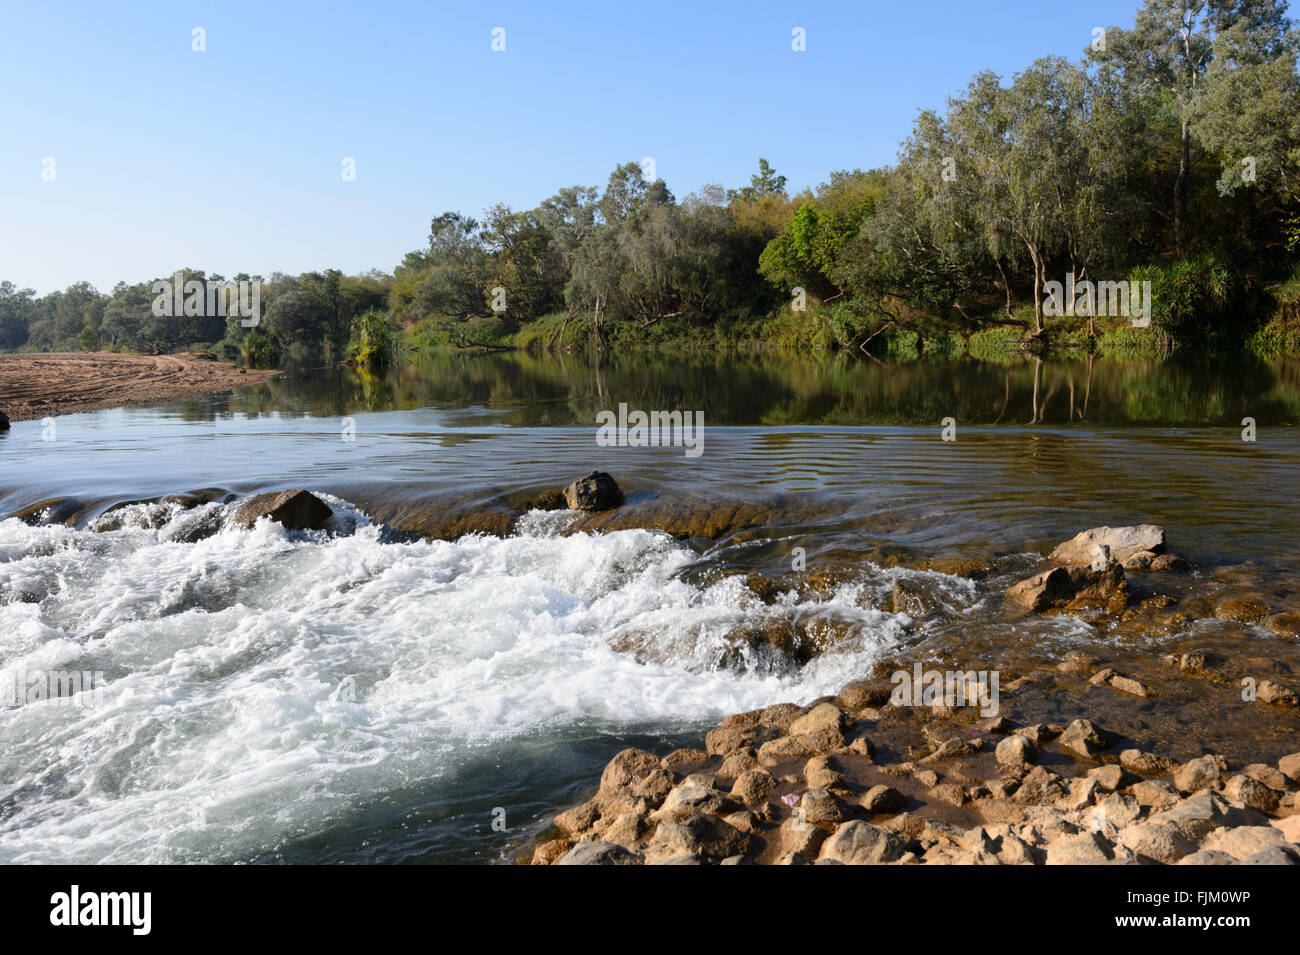 Daly River Crossing, Northern Territory, Australia Stock Photo